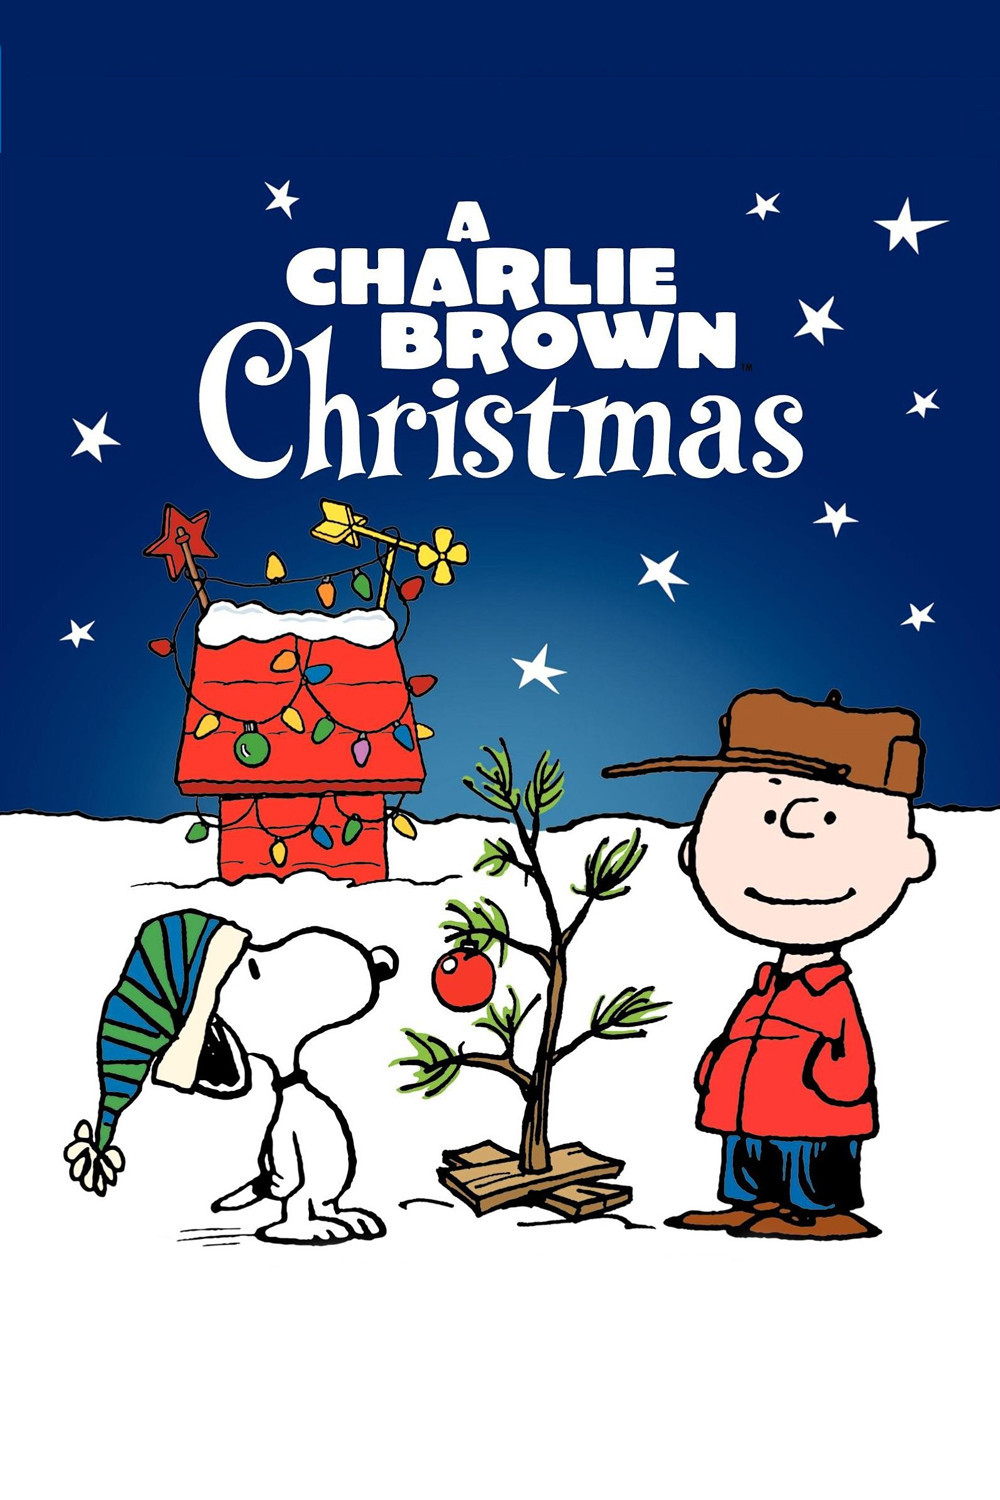 12 DAYS OF CHRISTMAS MOVIE NIGHTS PRESENTS: A Charlie Brown Christmas - Wooder Ice